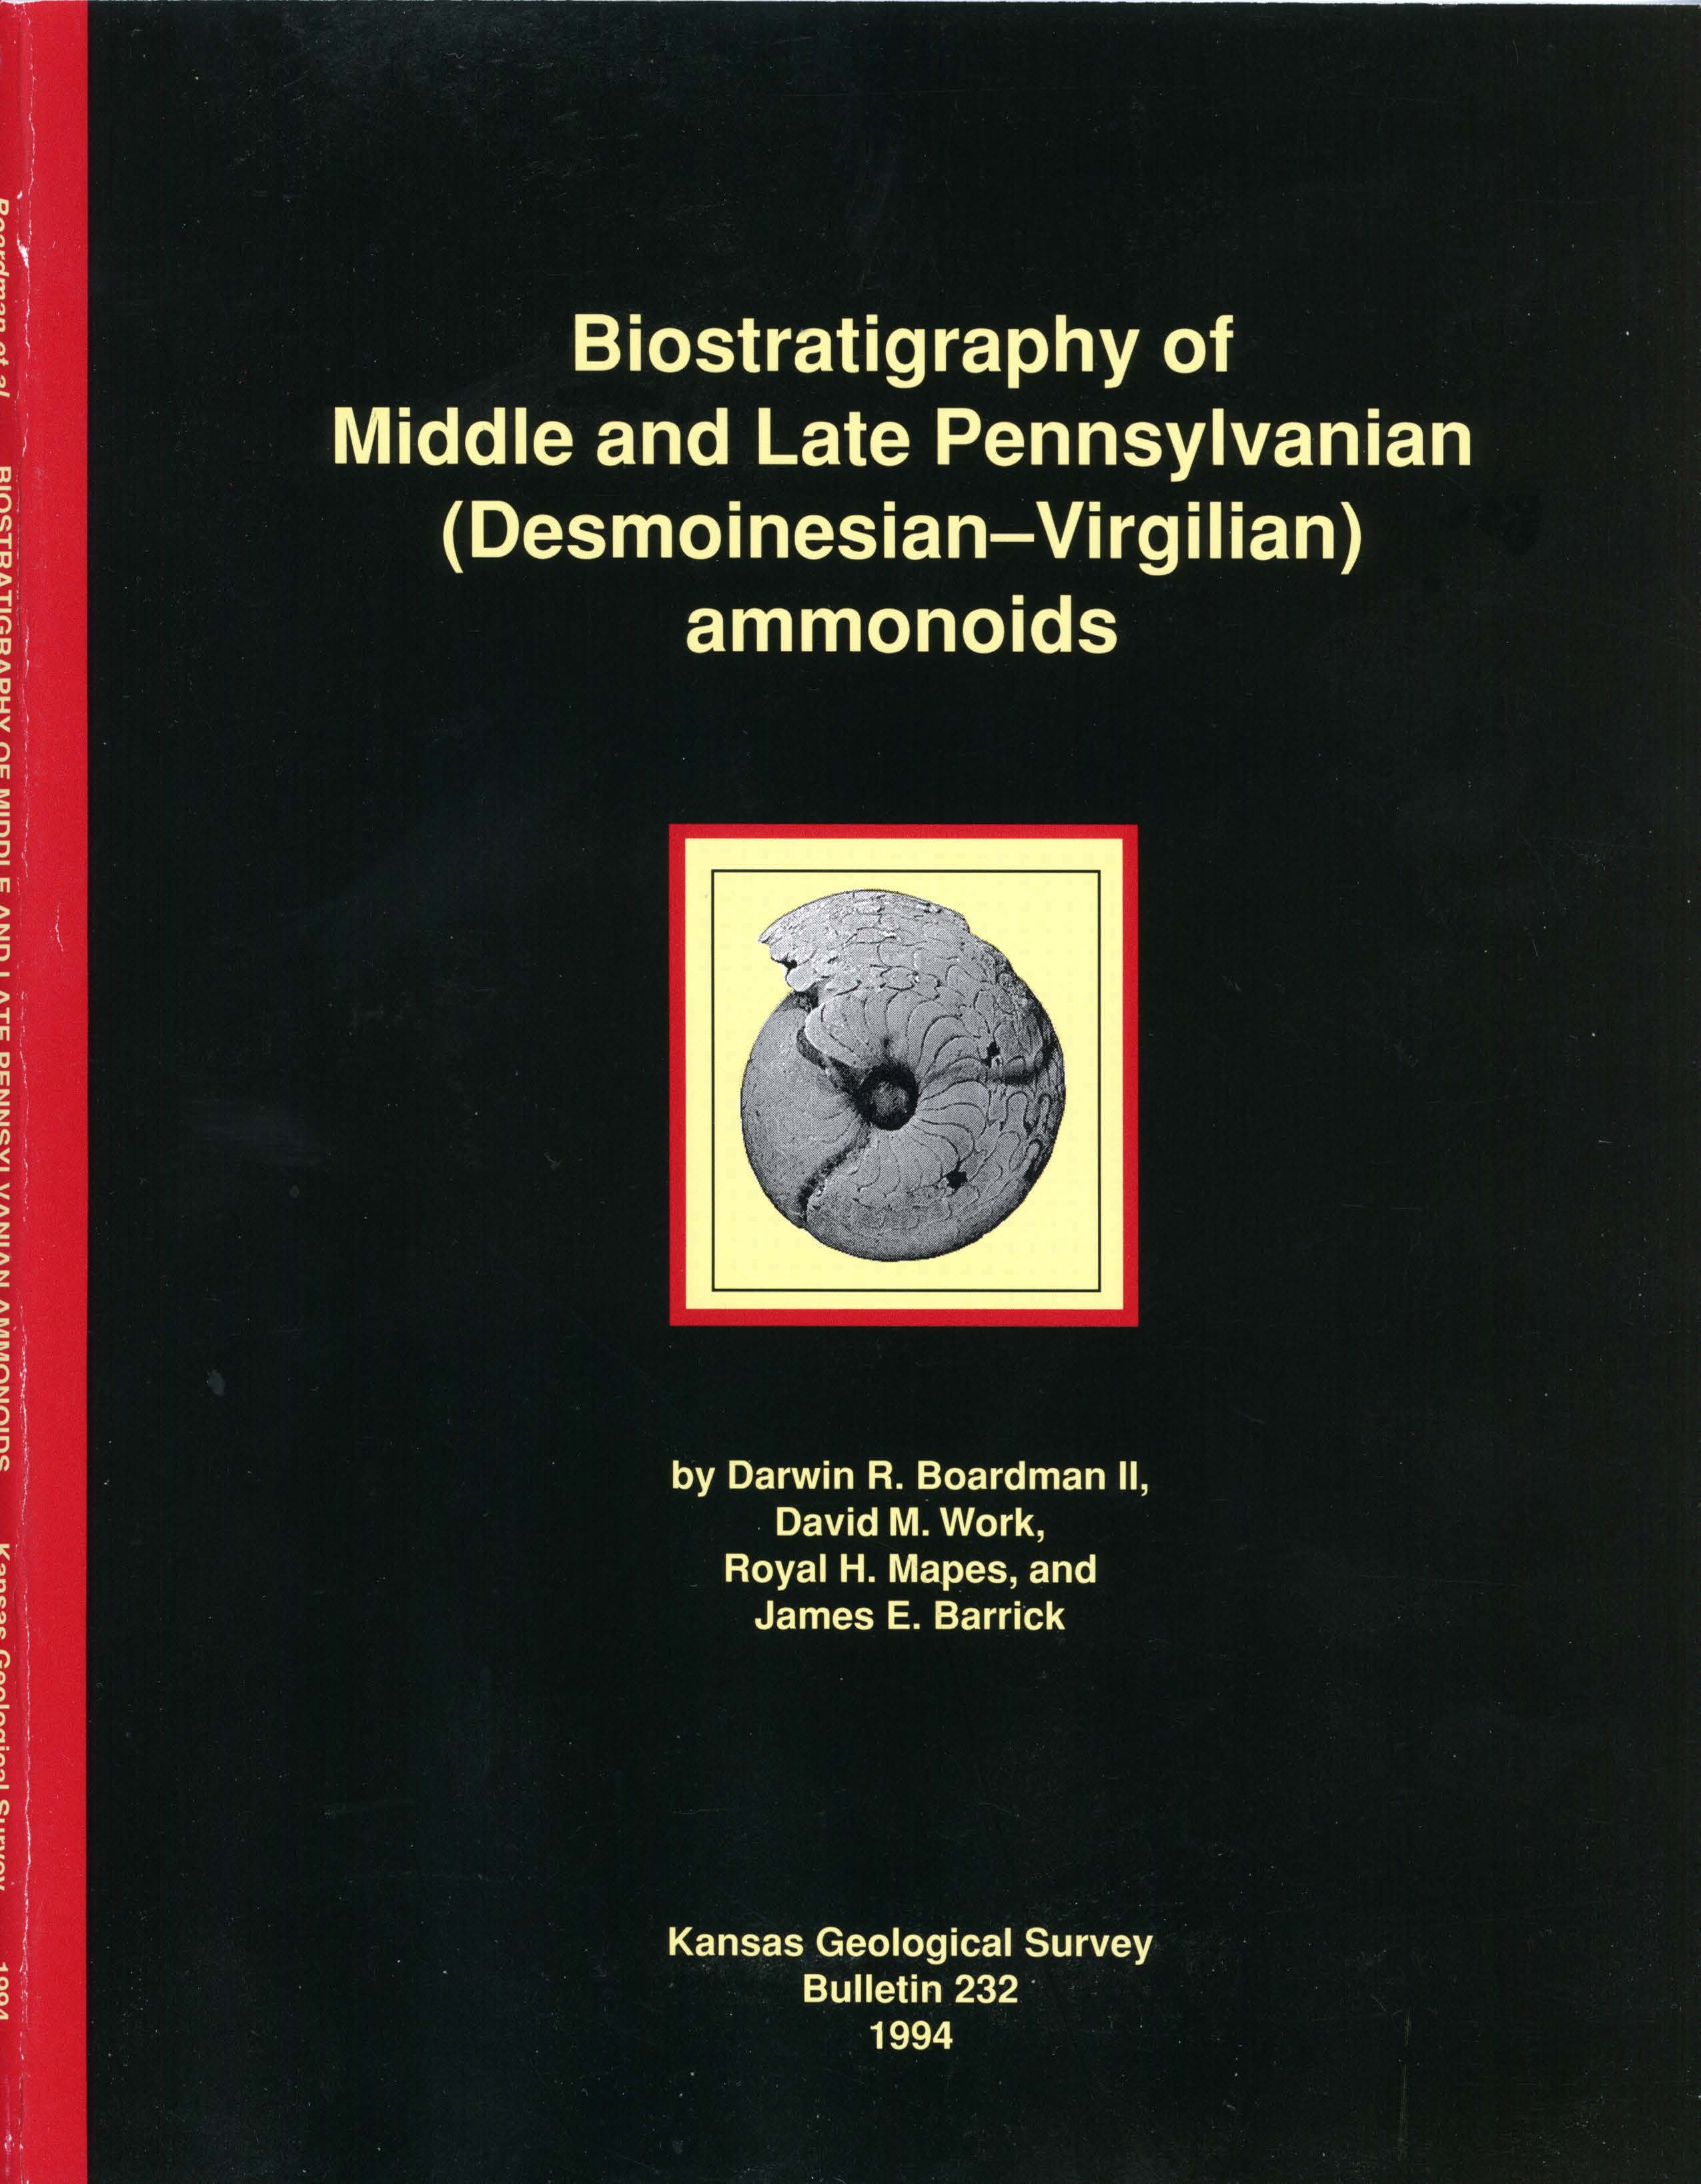 					View No. 232 (1994): Biostratigraphy of Middle and Late Pennsylvanian (Desmoinesian-Virgilian) Ammonoids
				